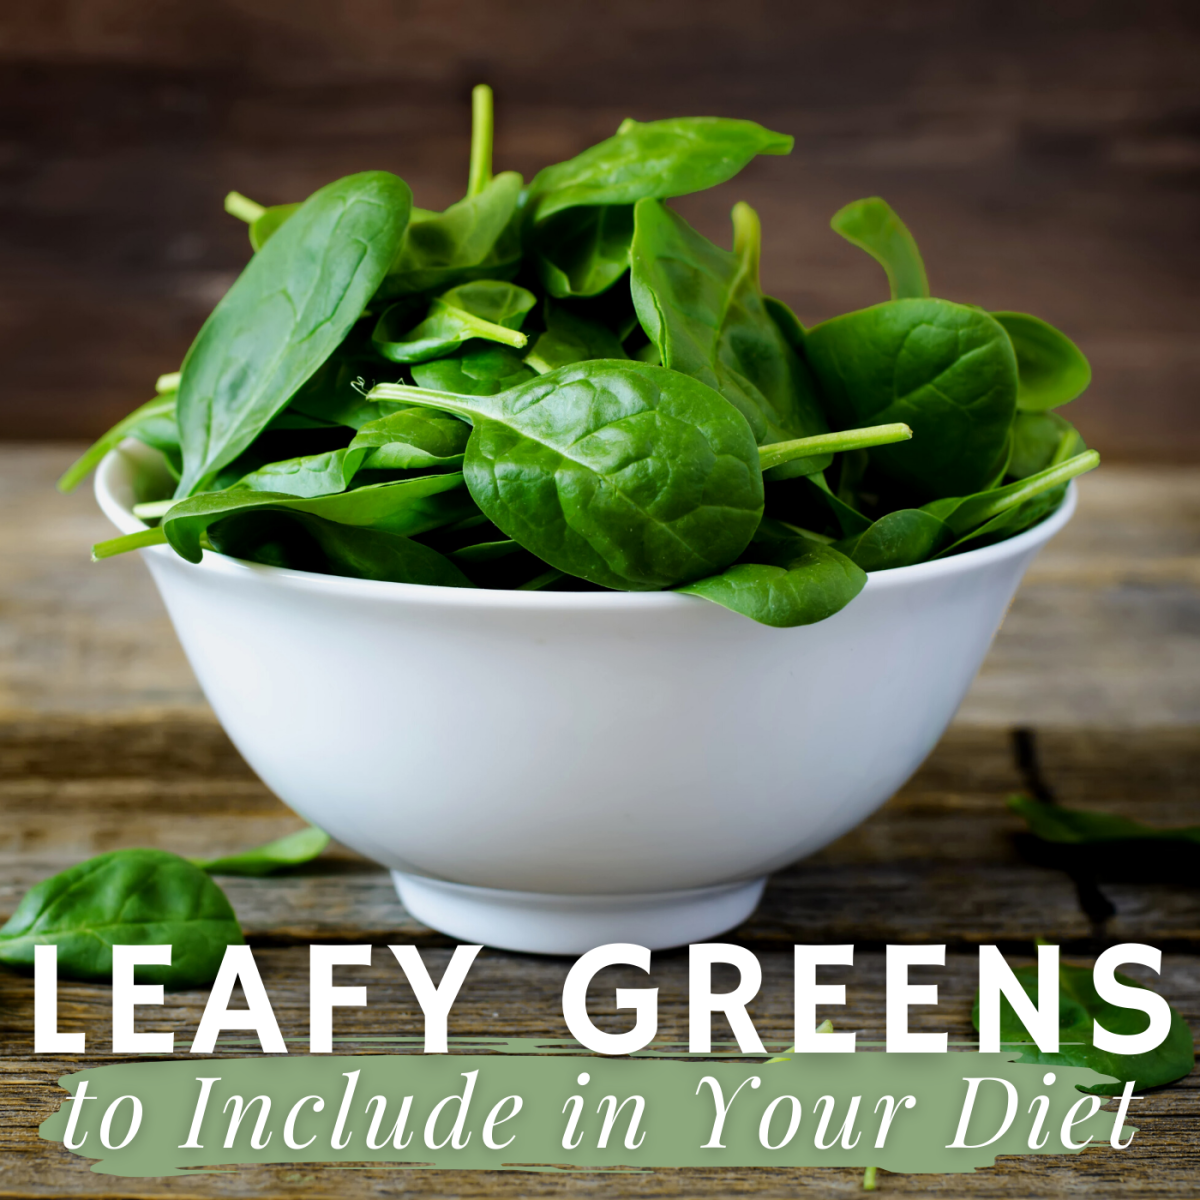 Get More Green by Eating These Four Leafy Green Vegetables